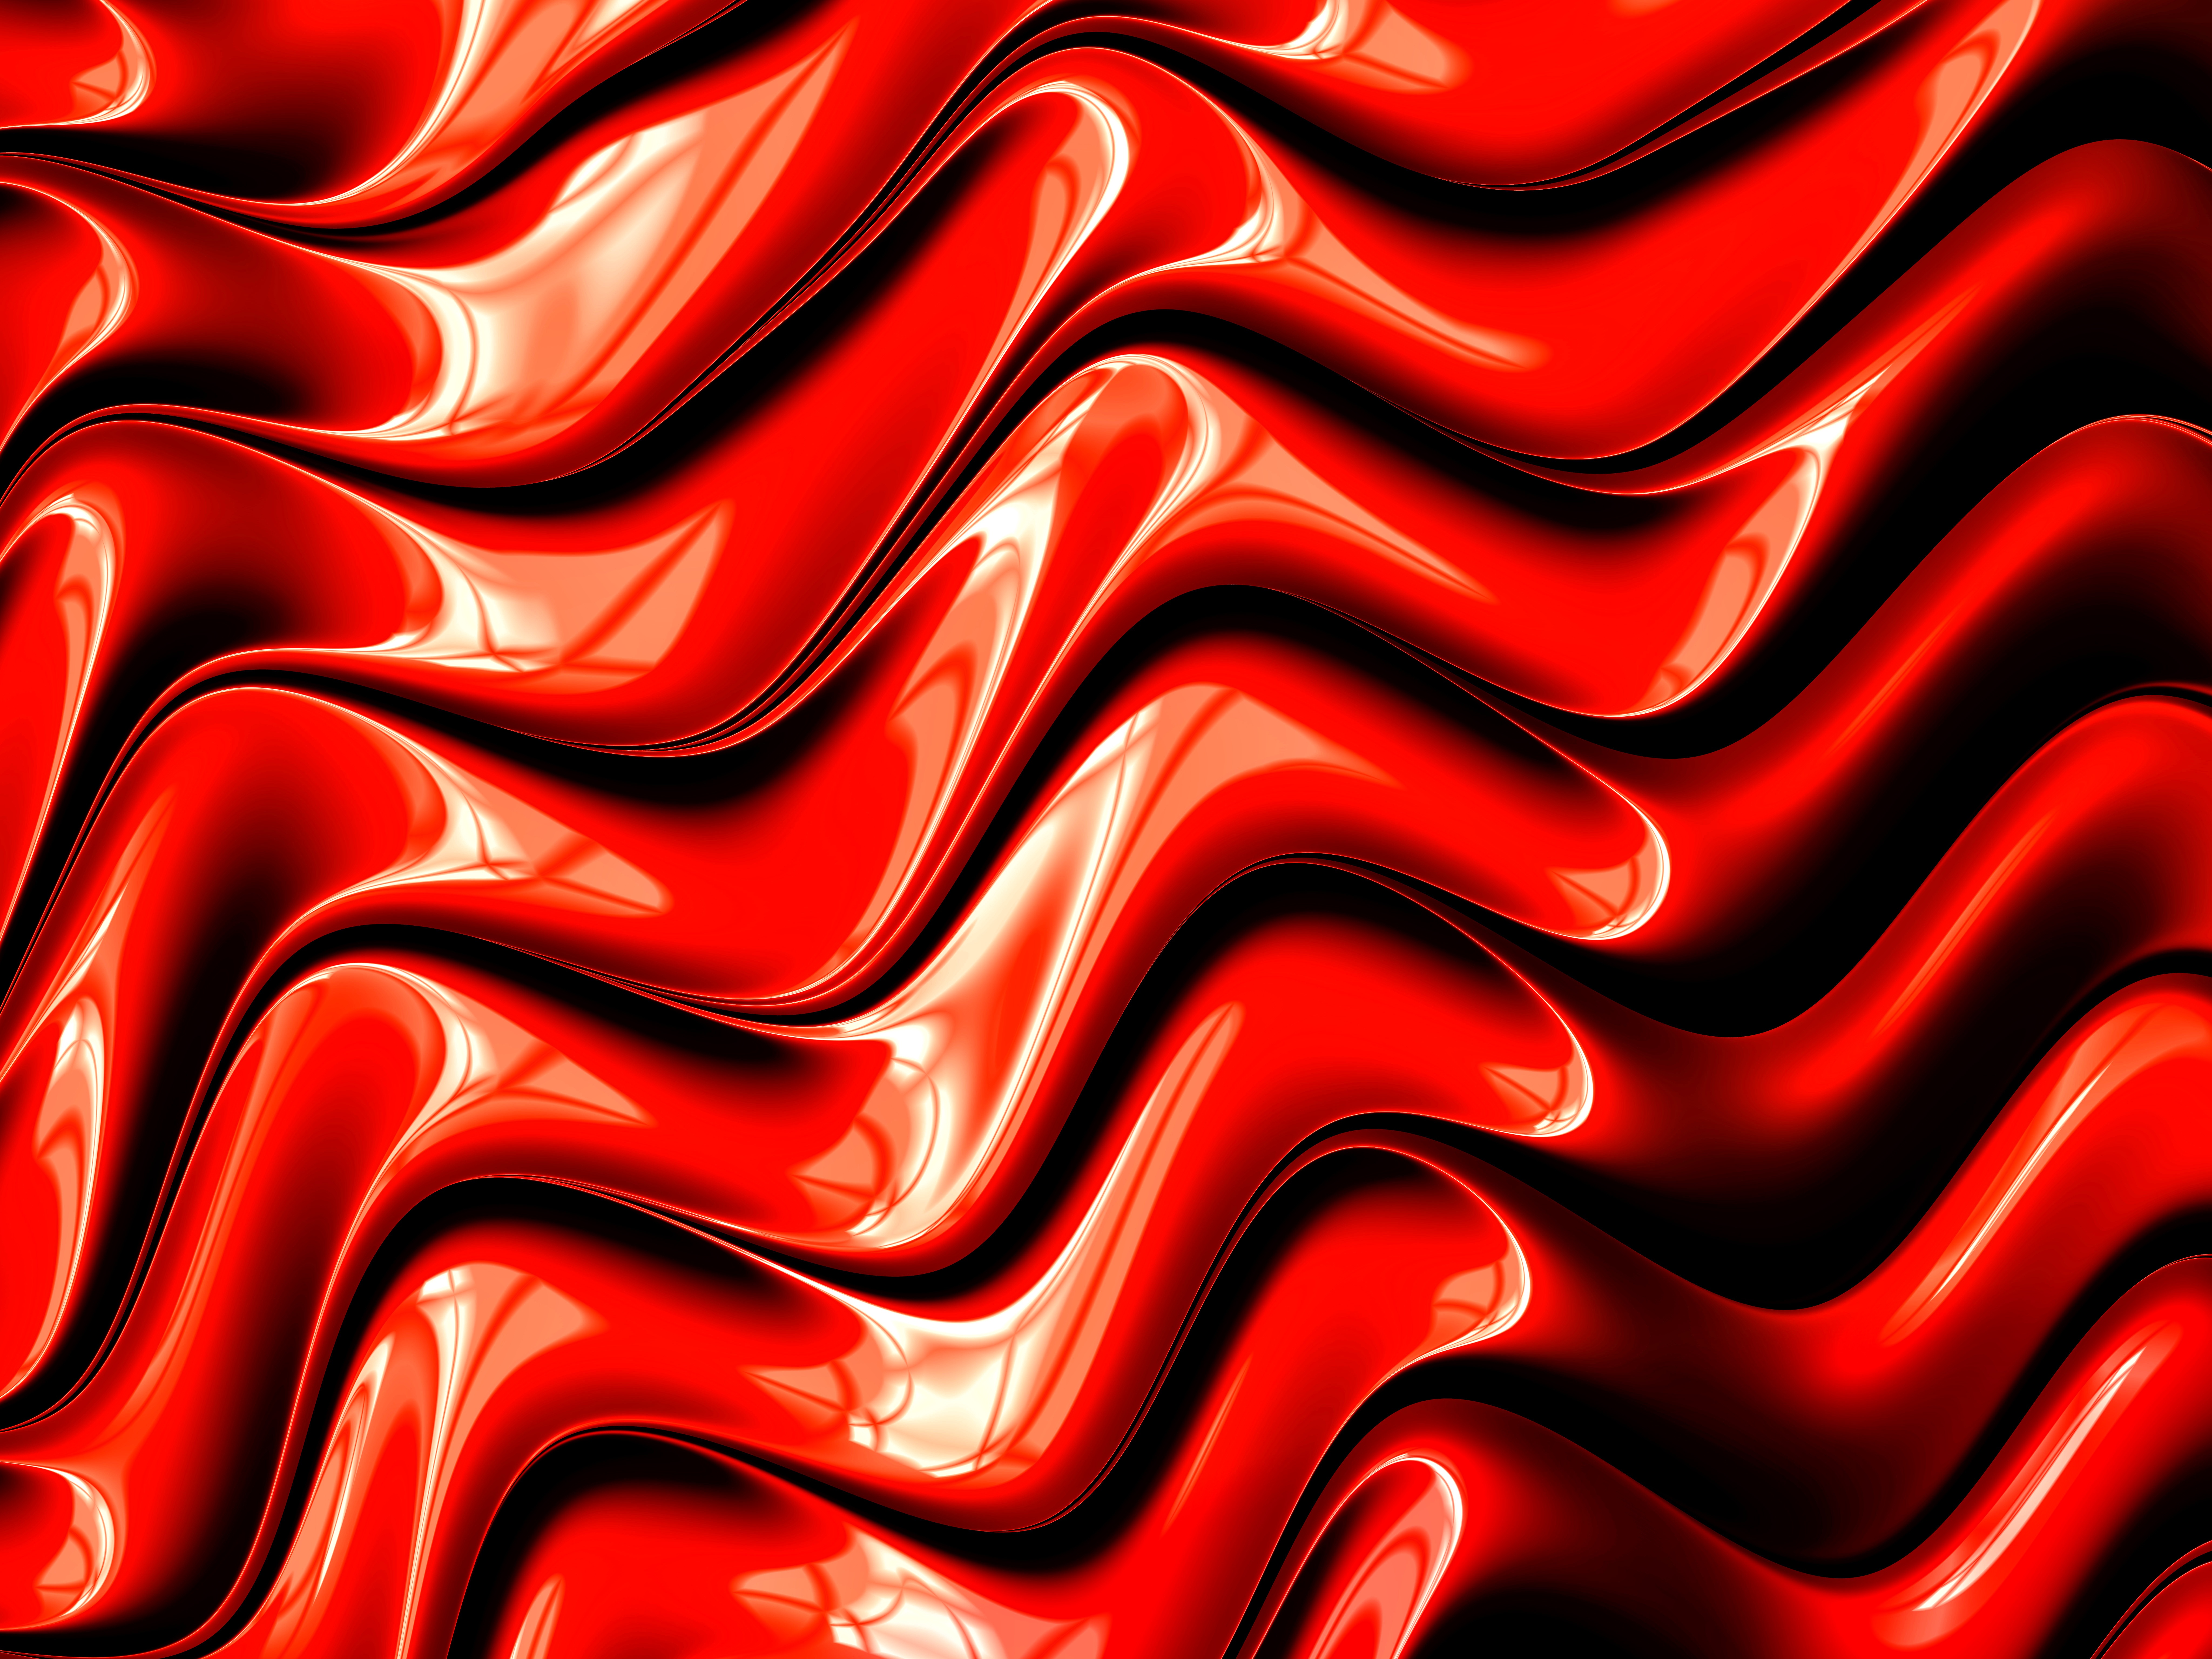 70483 Screensavers and Wallpapers Graphics for phone. Download 3d, red, surface, fractal, graphics pictures for free